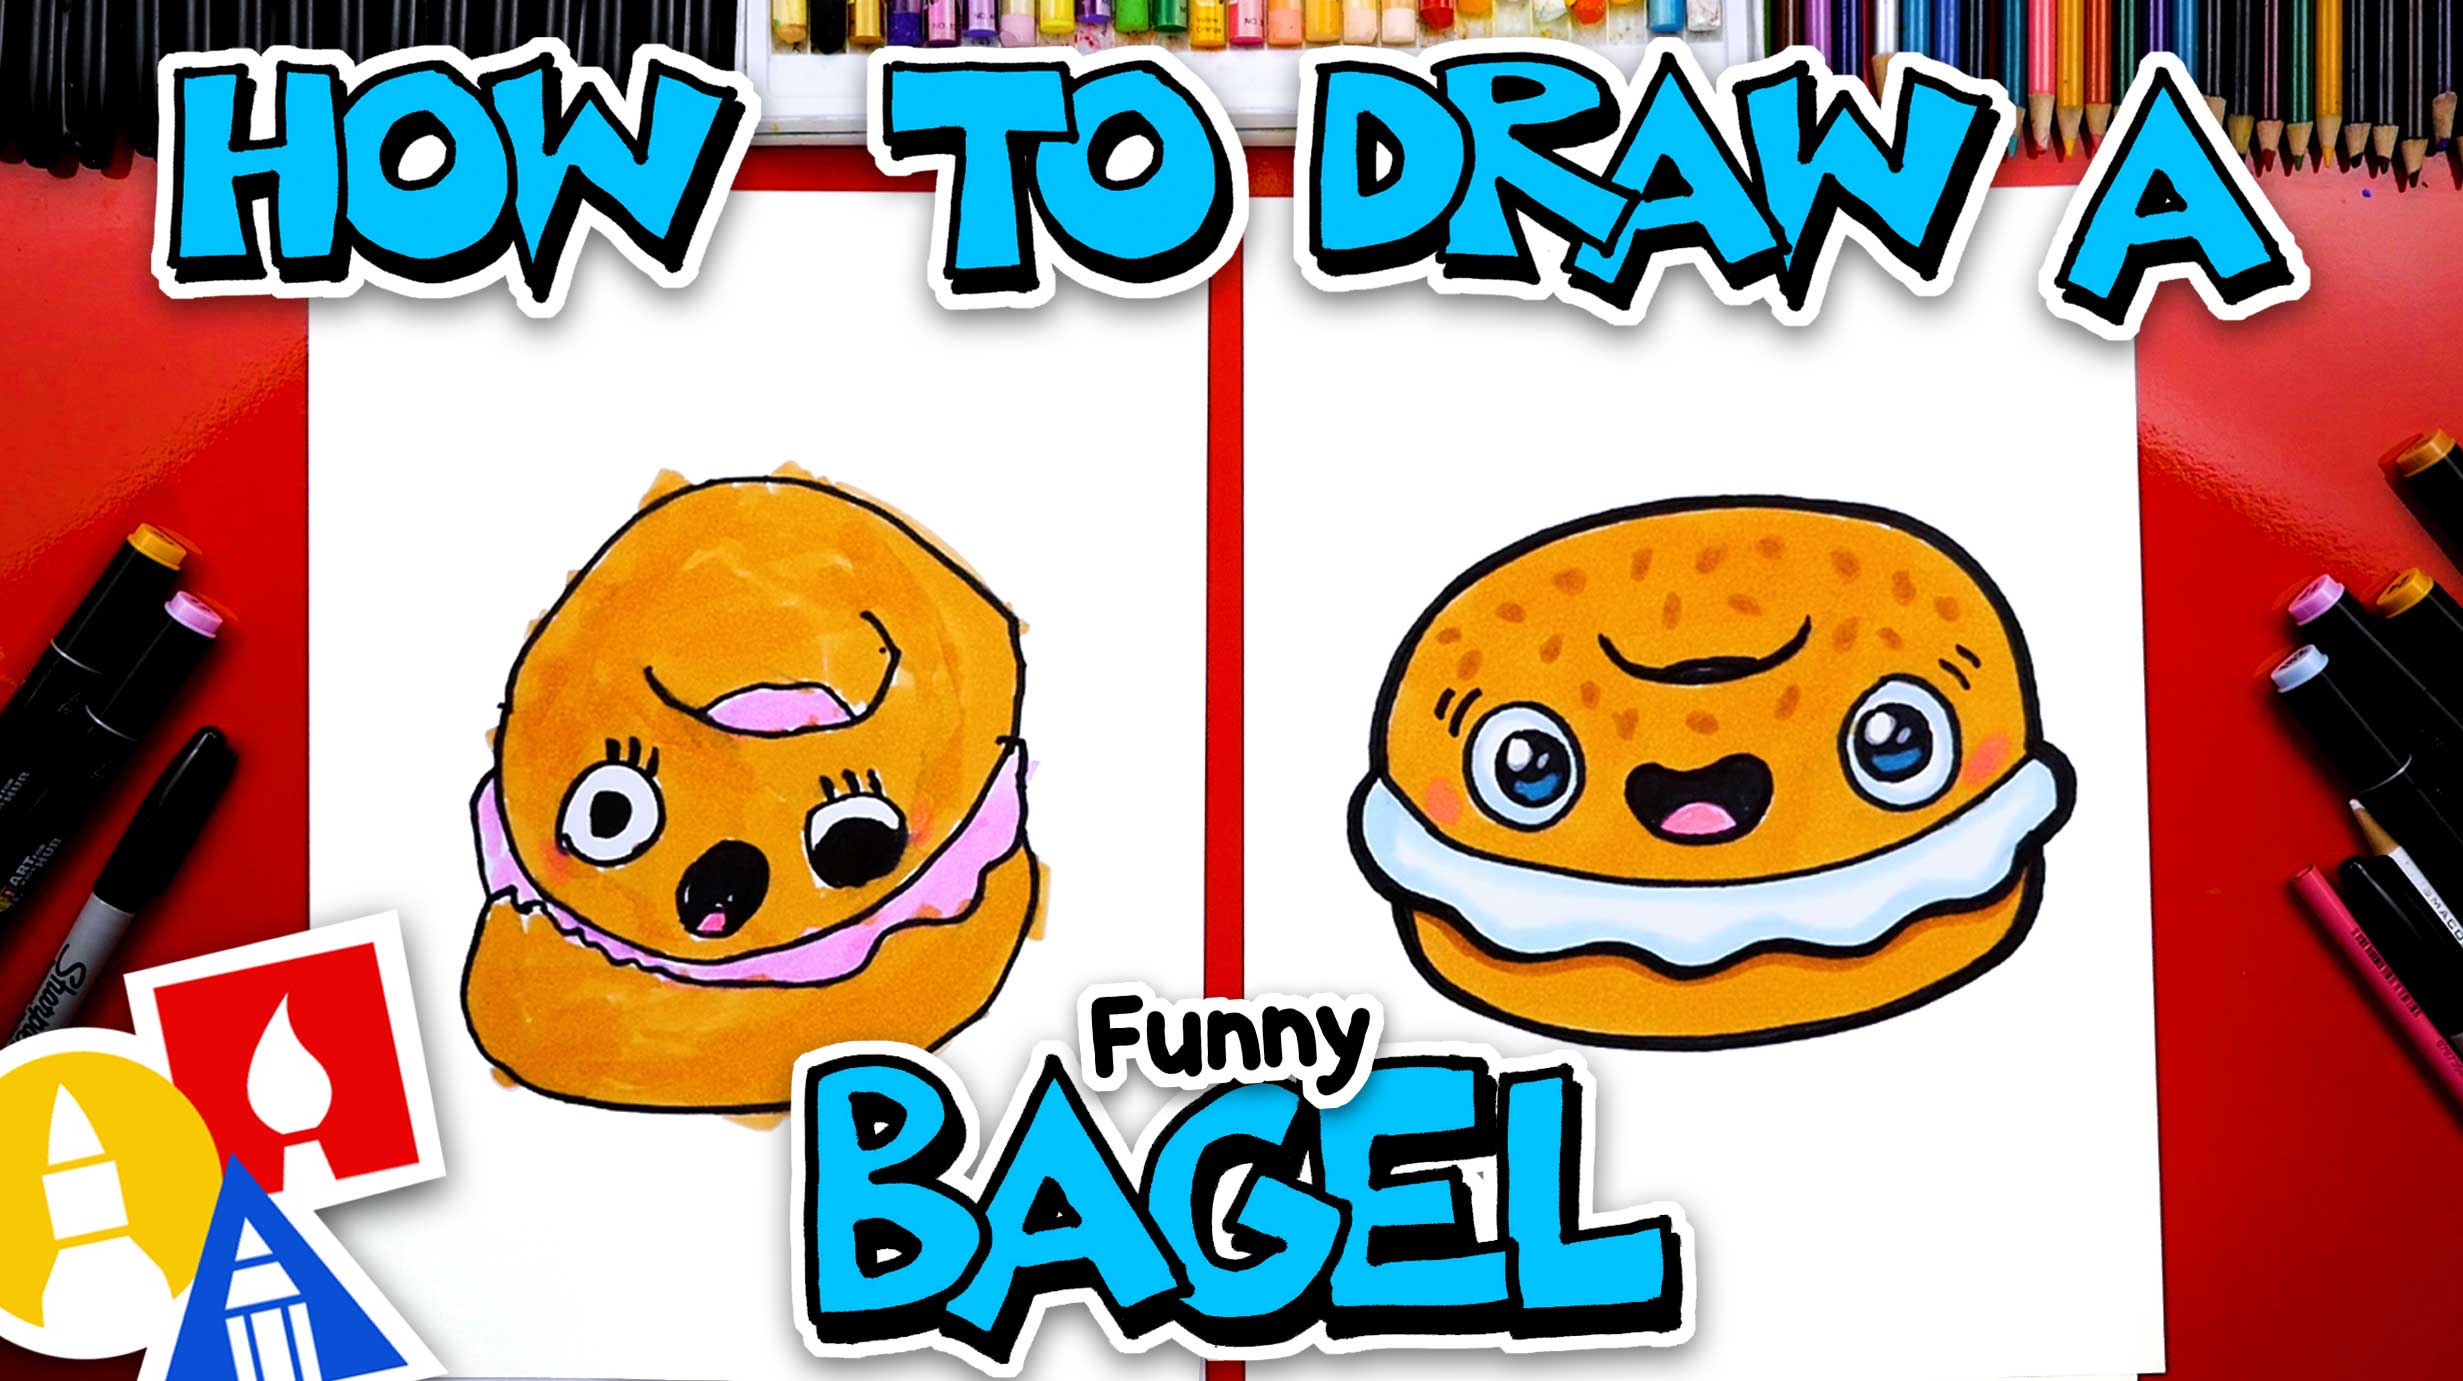 How To Draw A Funny Bagel Art For Kids Hub